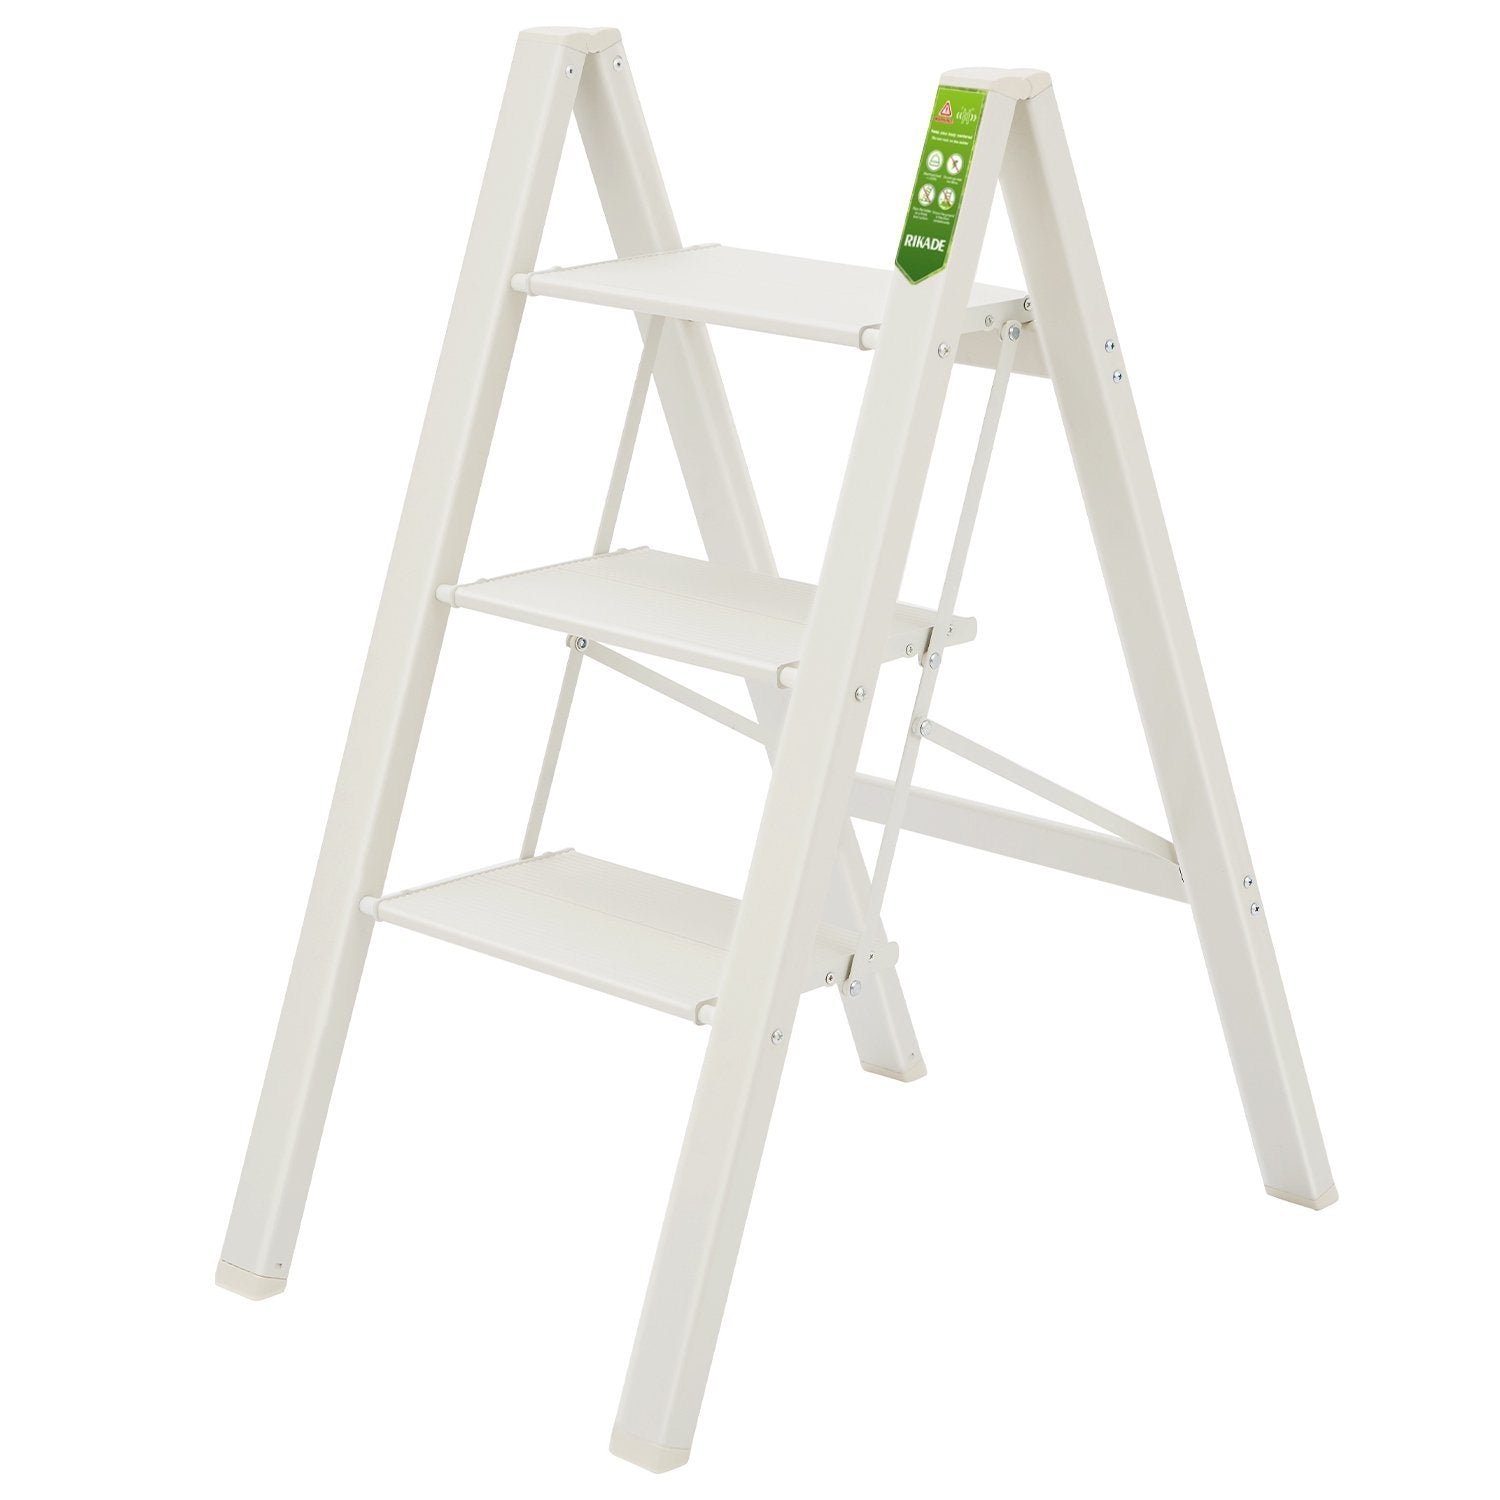 3 Step Ladder; Folding Step Stool with Wide Anti-Slip Pedal; Aluminum Portable Lightweight Ladder for Home and Office Use; Kitchen Step Stool 330lb Capacity